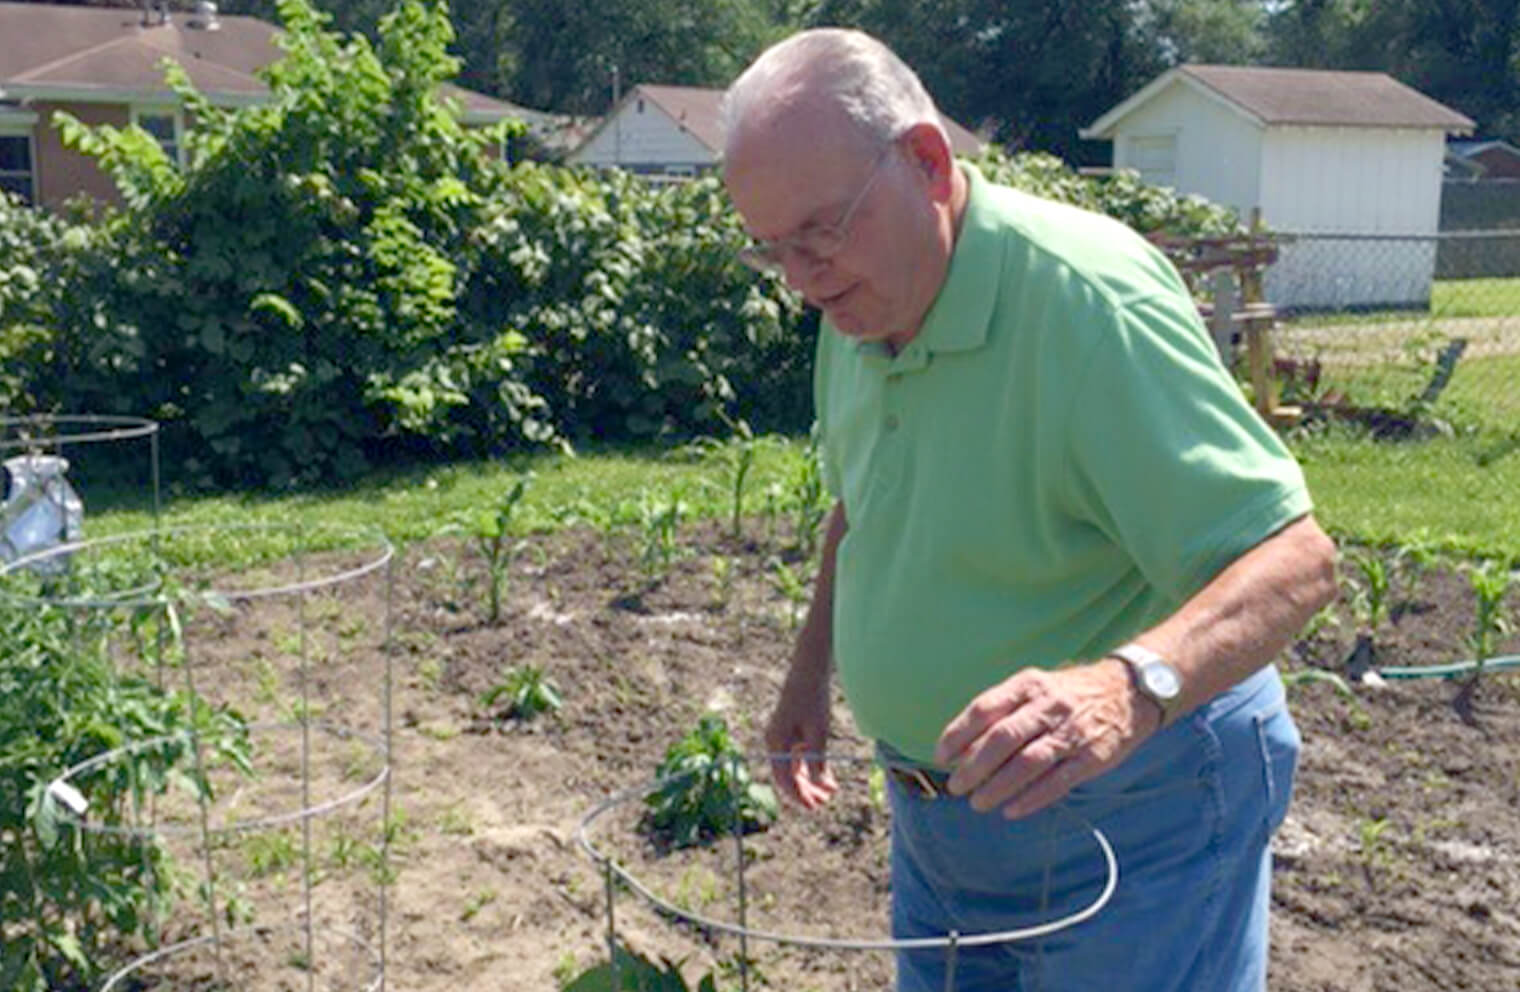 2021-01-26 Article: A Garden of Growth, Elvis Durrill's Story